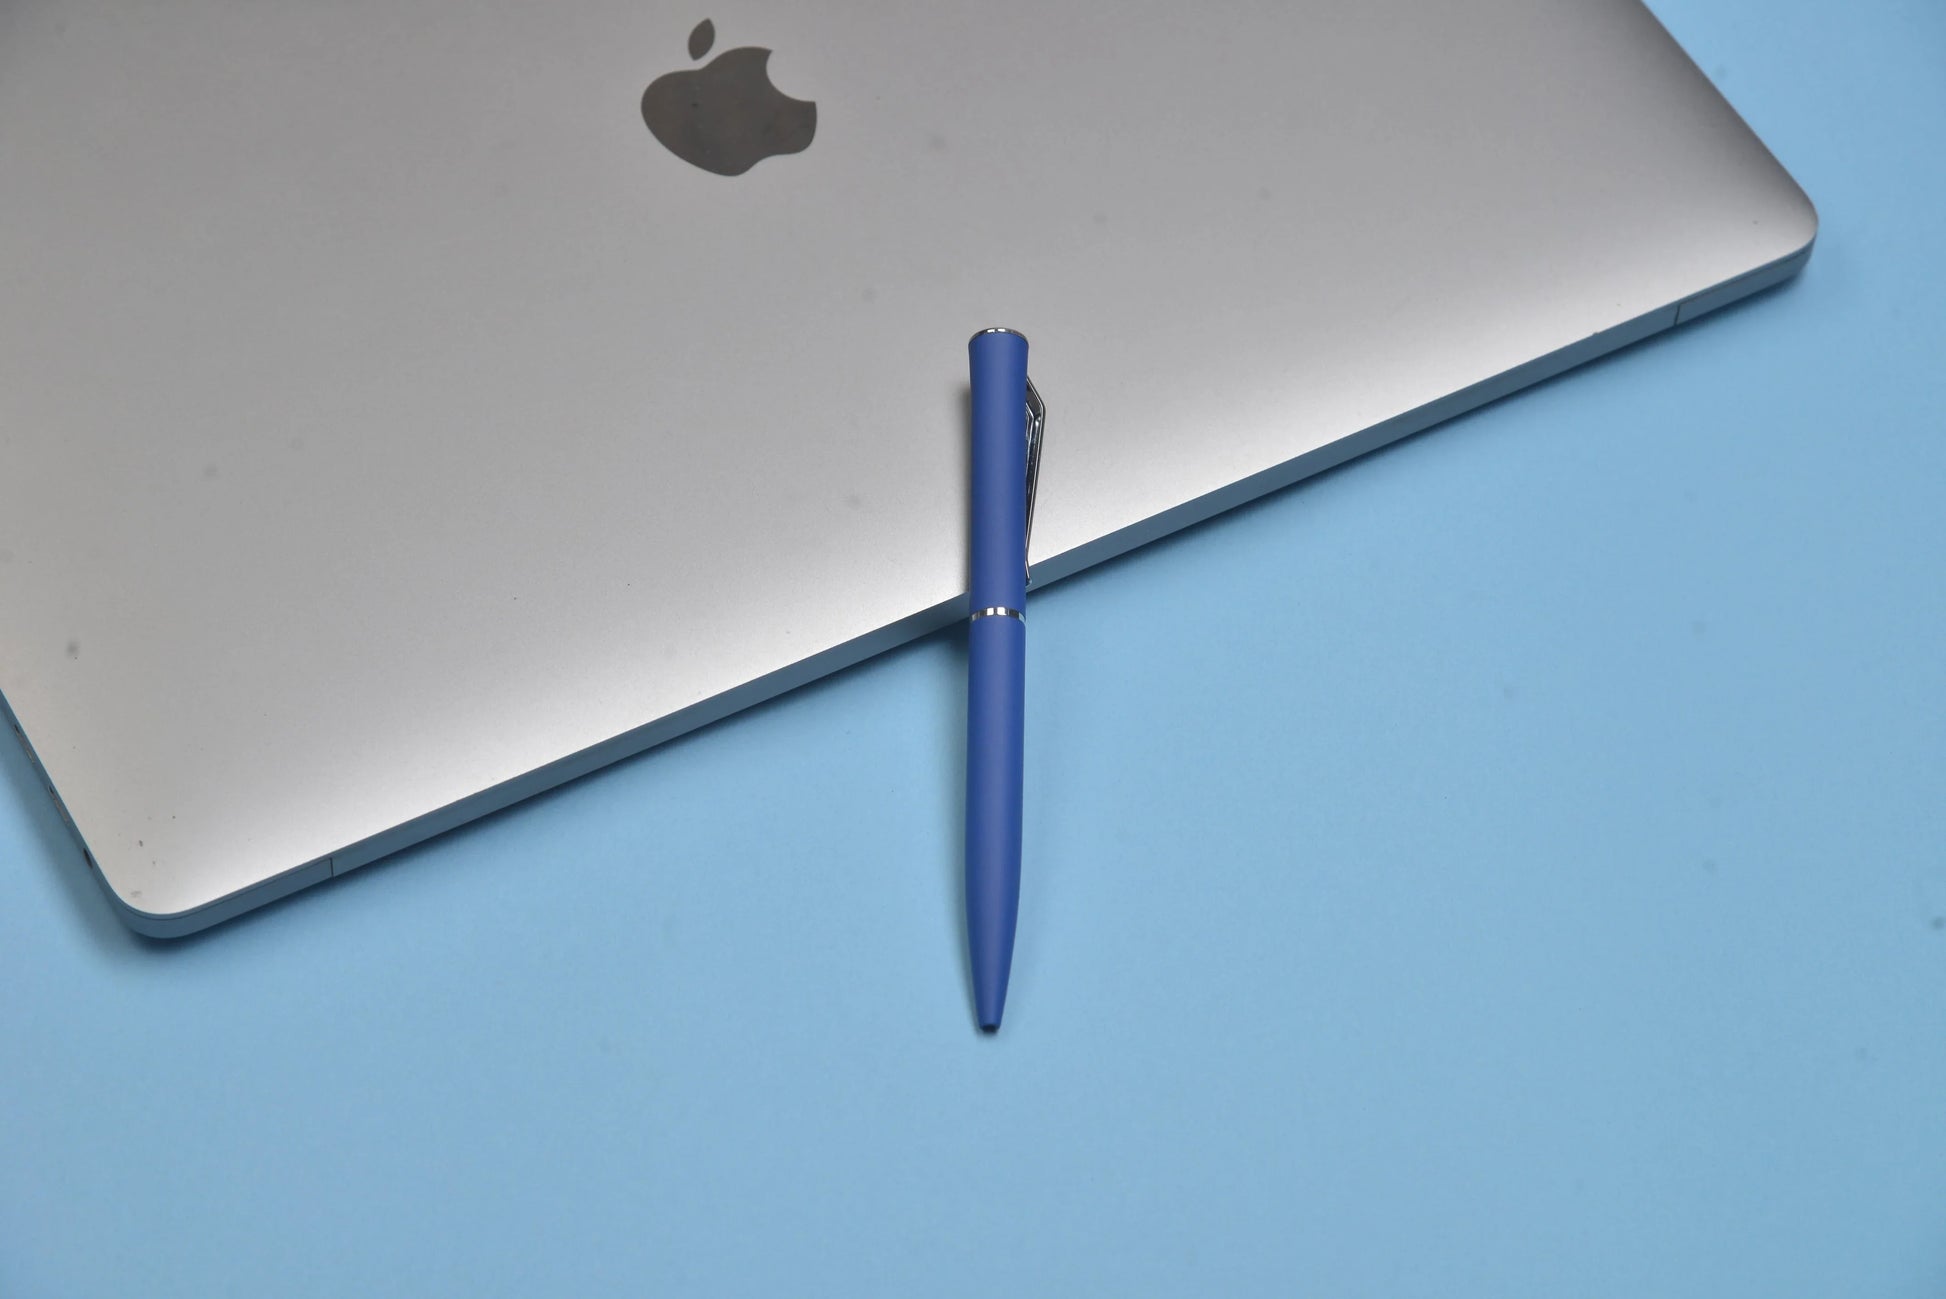 The perfect combination of form and function, this metal pen is a must-have for any workspace.